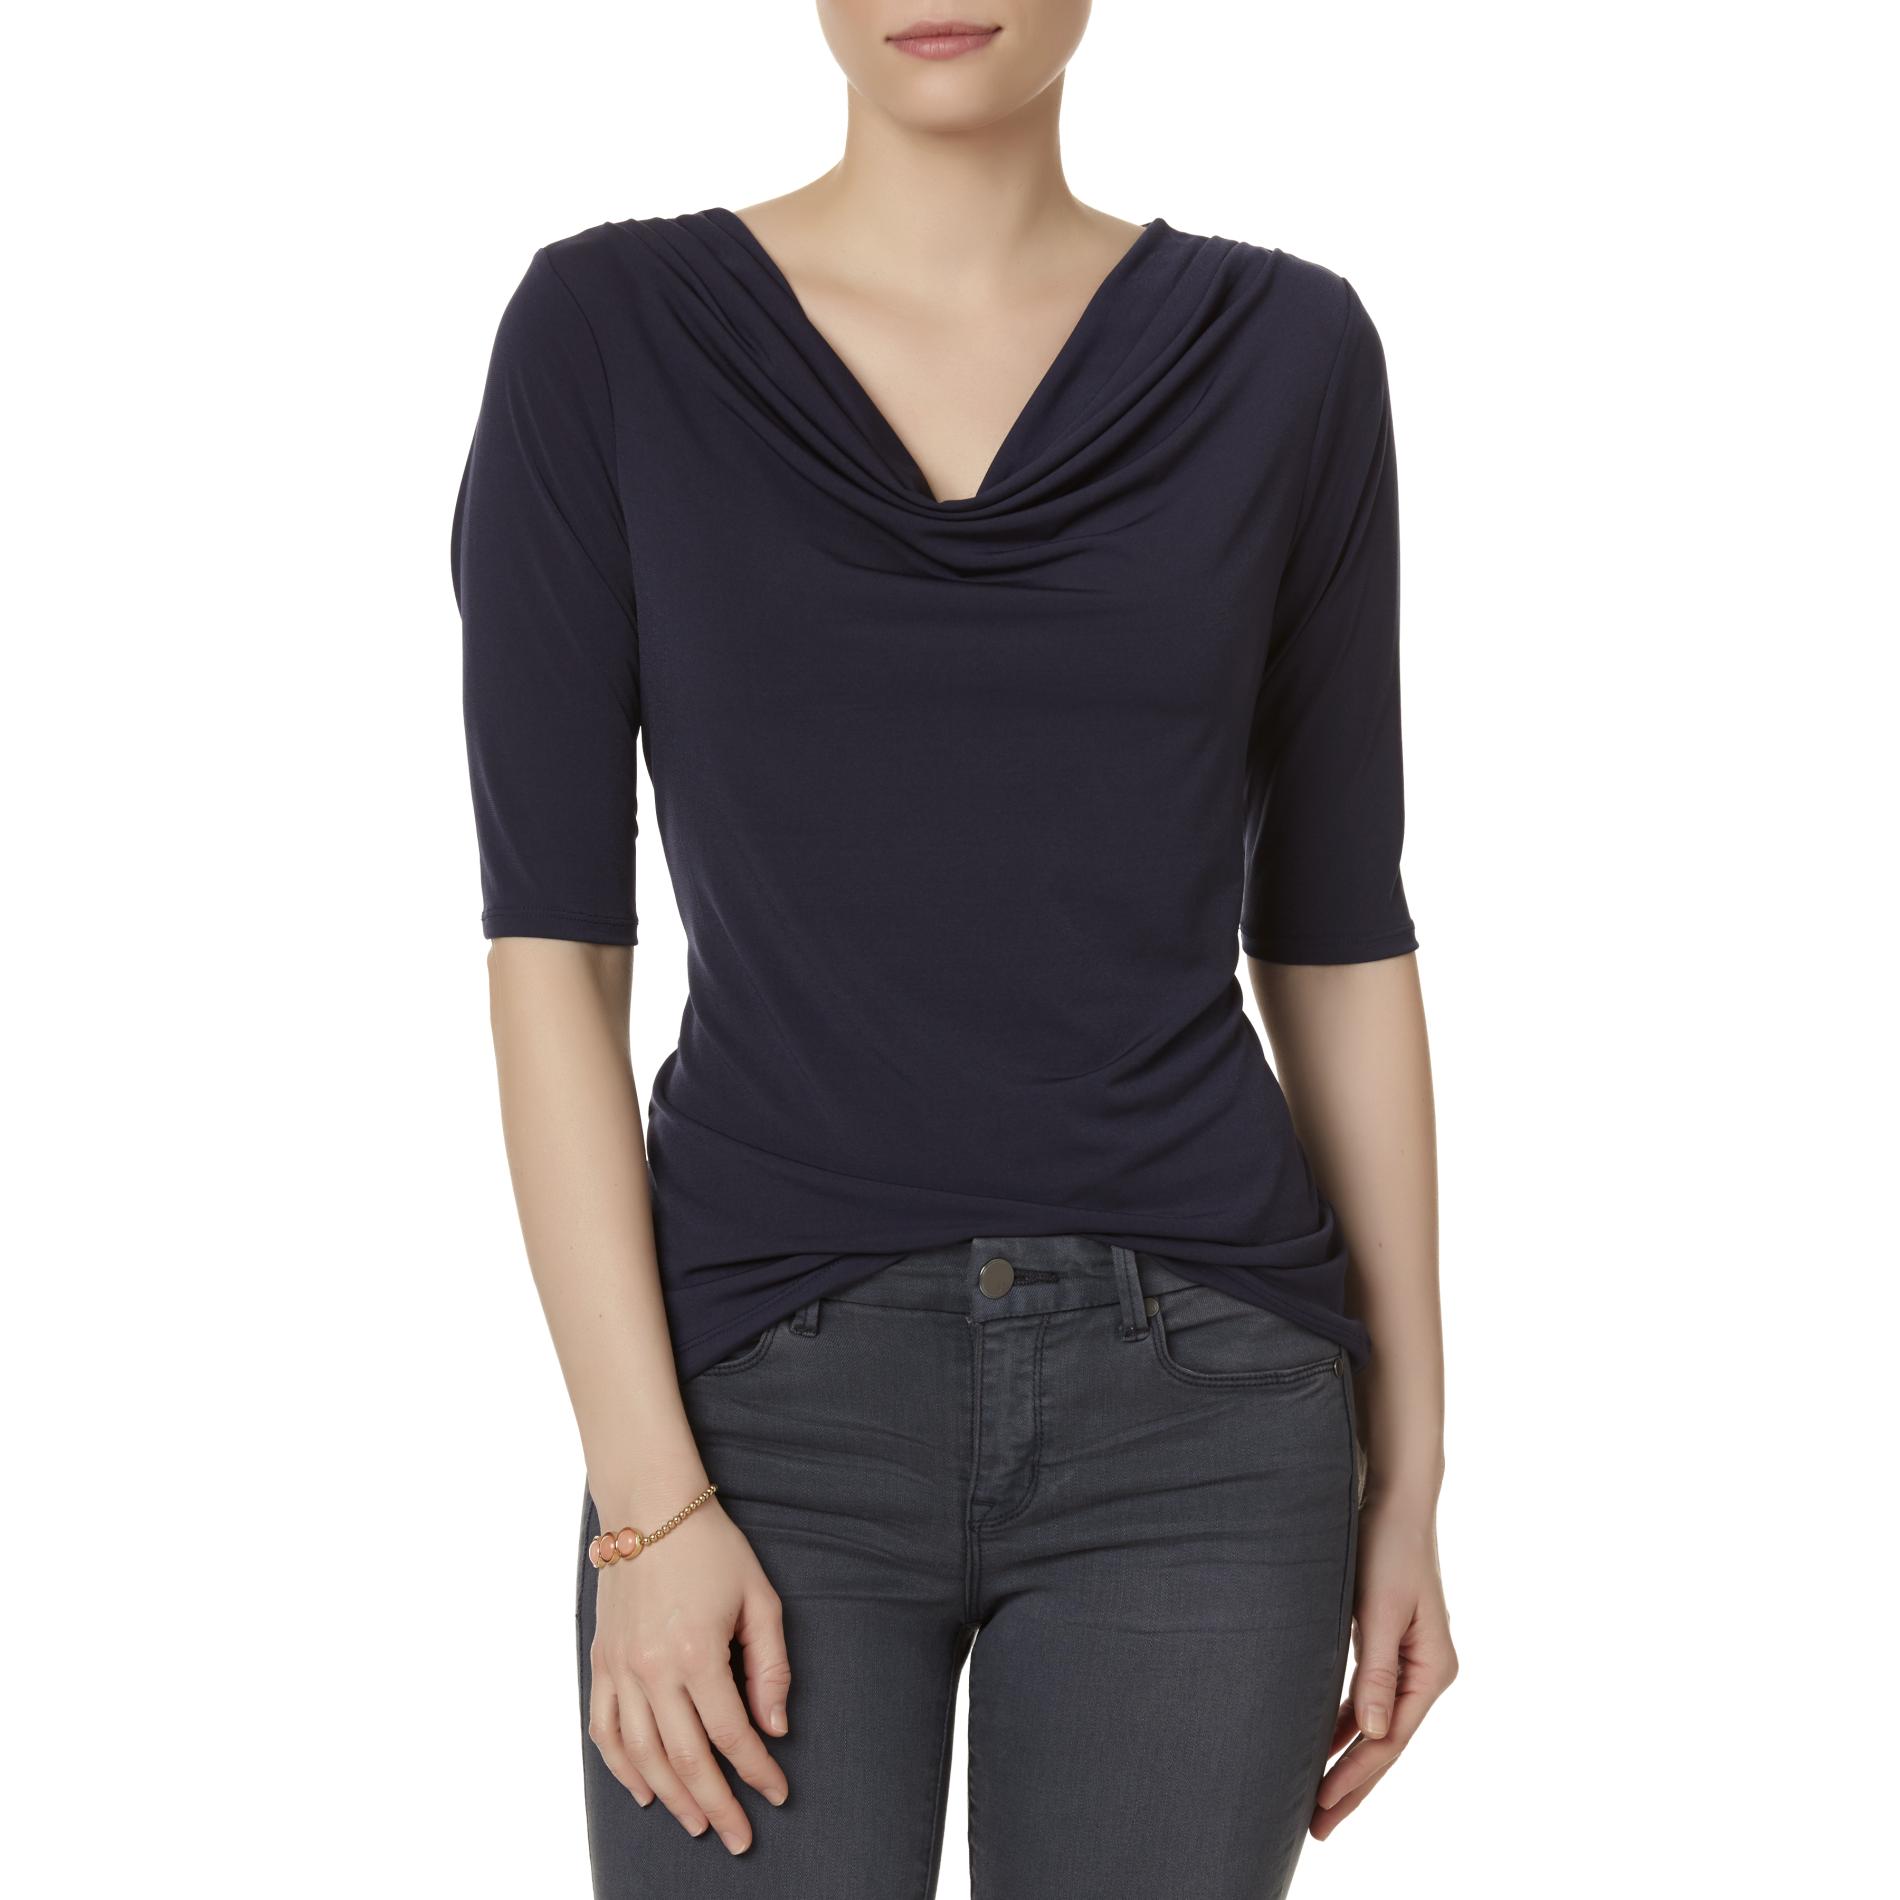 Simply Styled Women's Elbow Sleeve Top